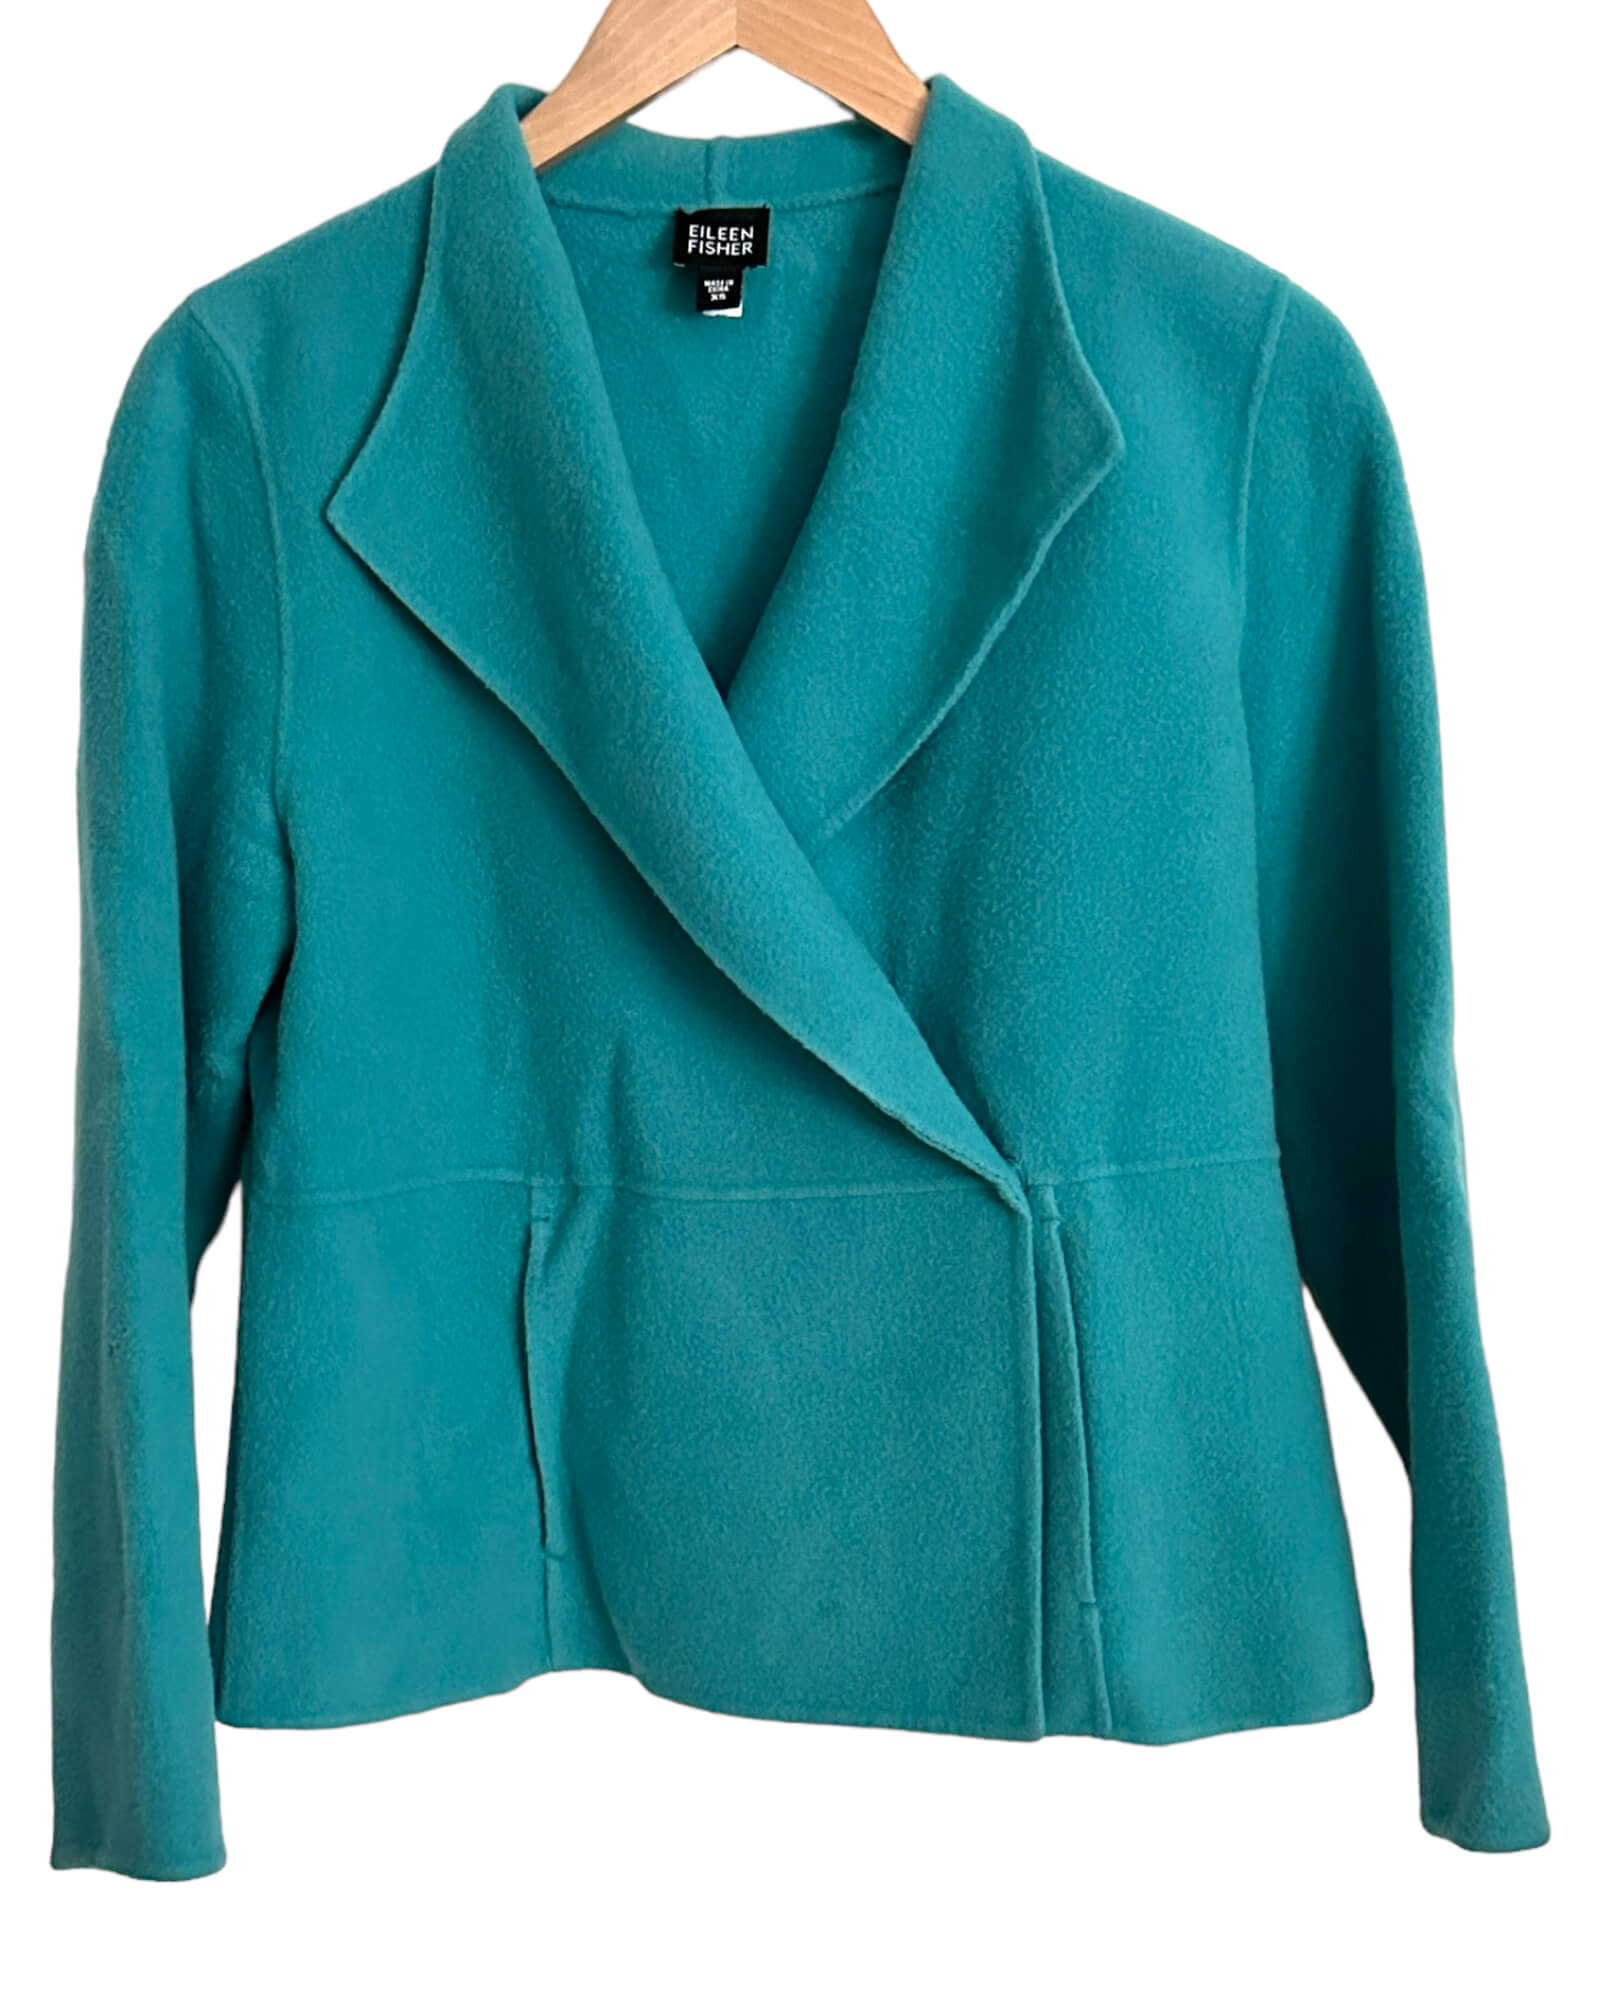 Soft Autumn EILEEN FISHER cashmere wool turquoise jacket